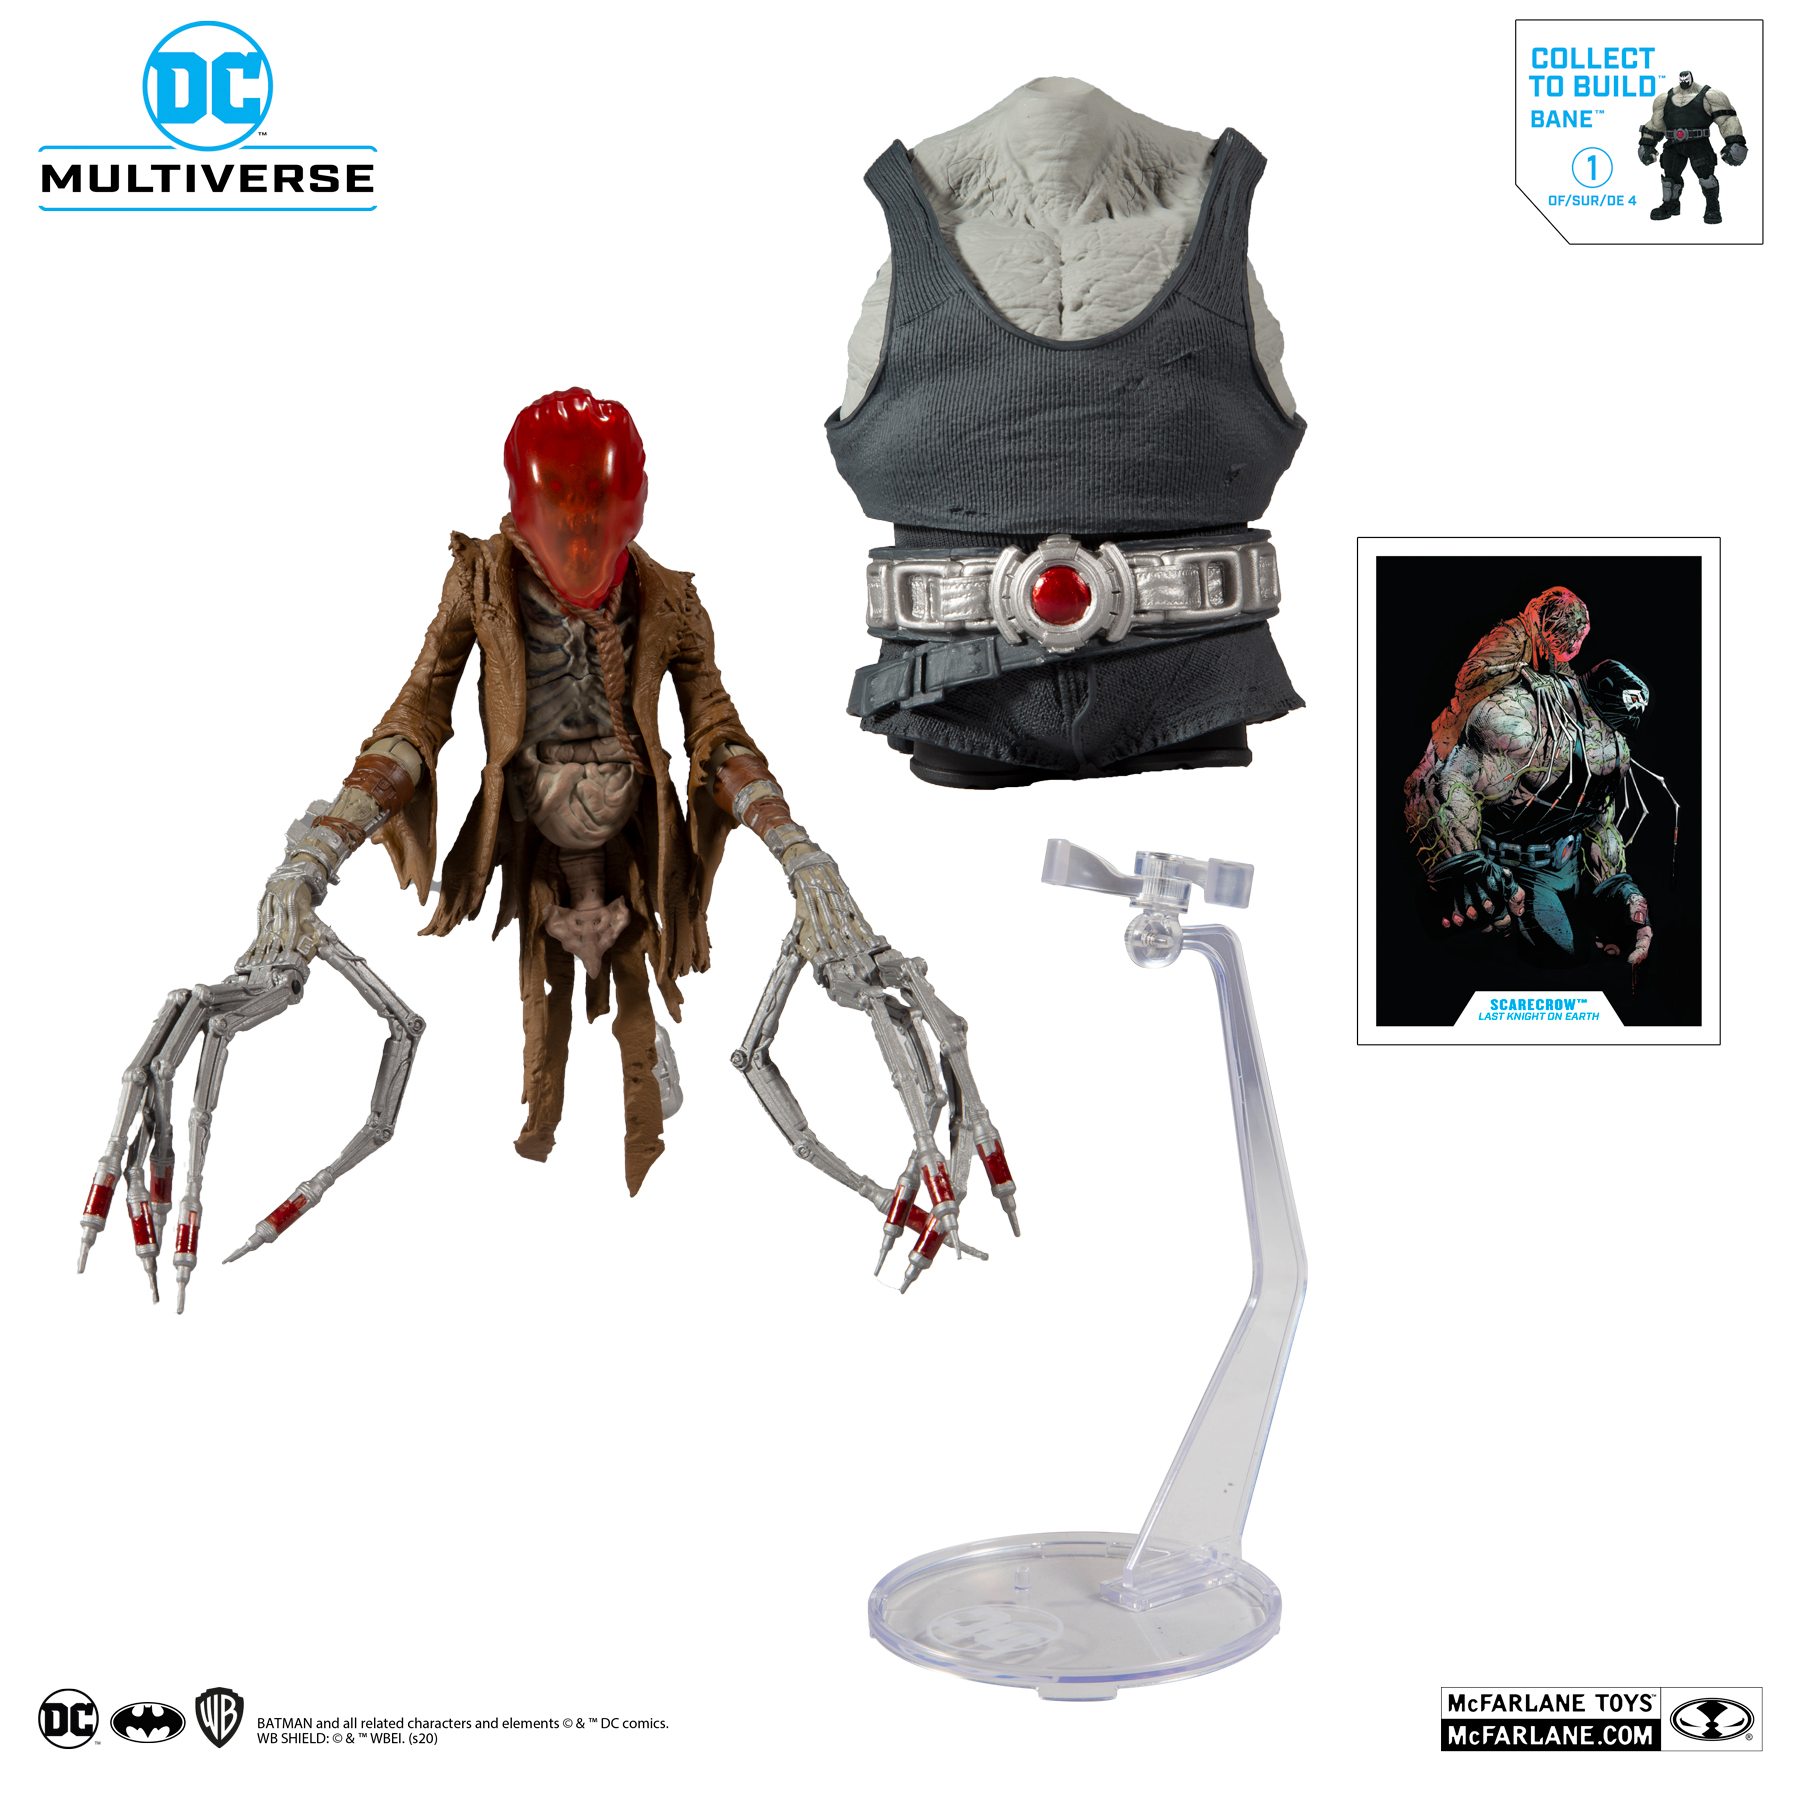 Details about   McFarlane DC Multiverse BANE BAF Complete Last Knight On Earth with Scarecrow 